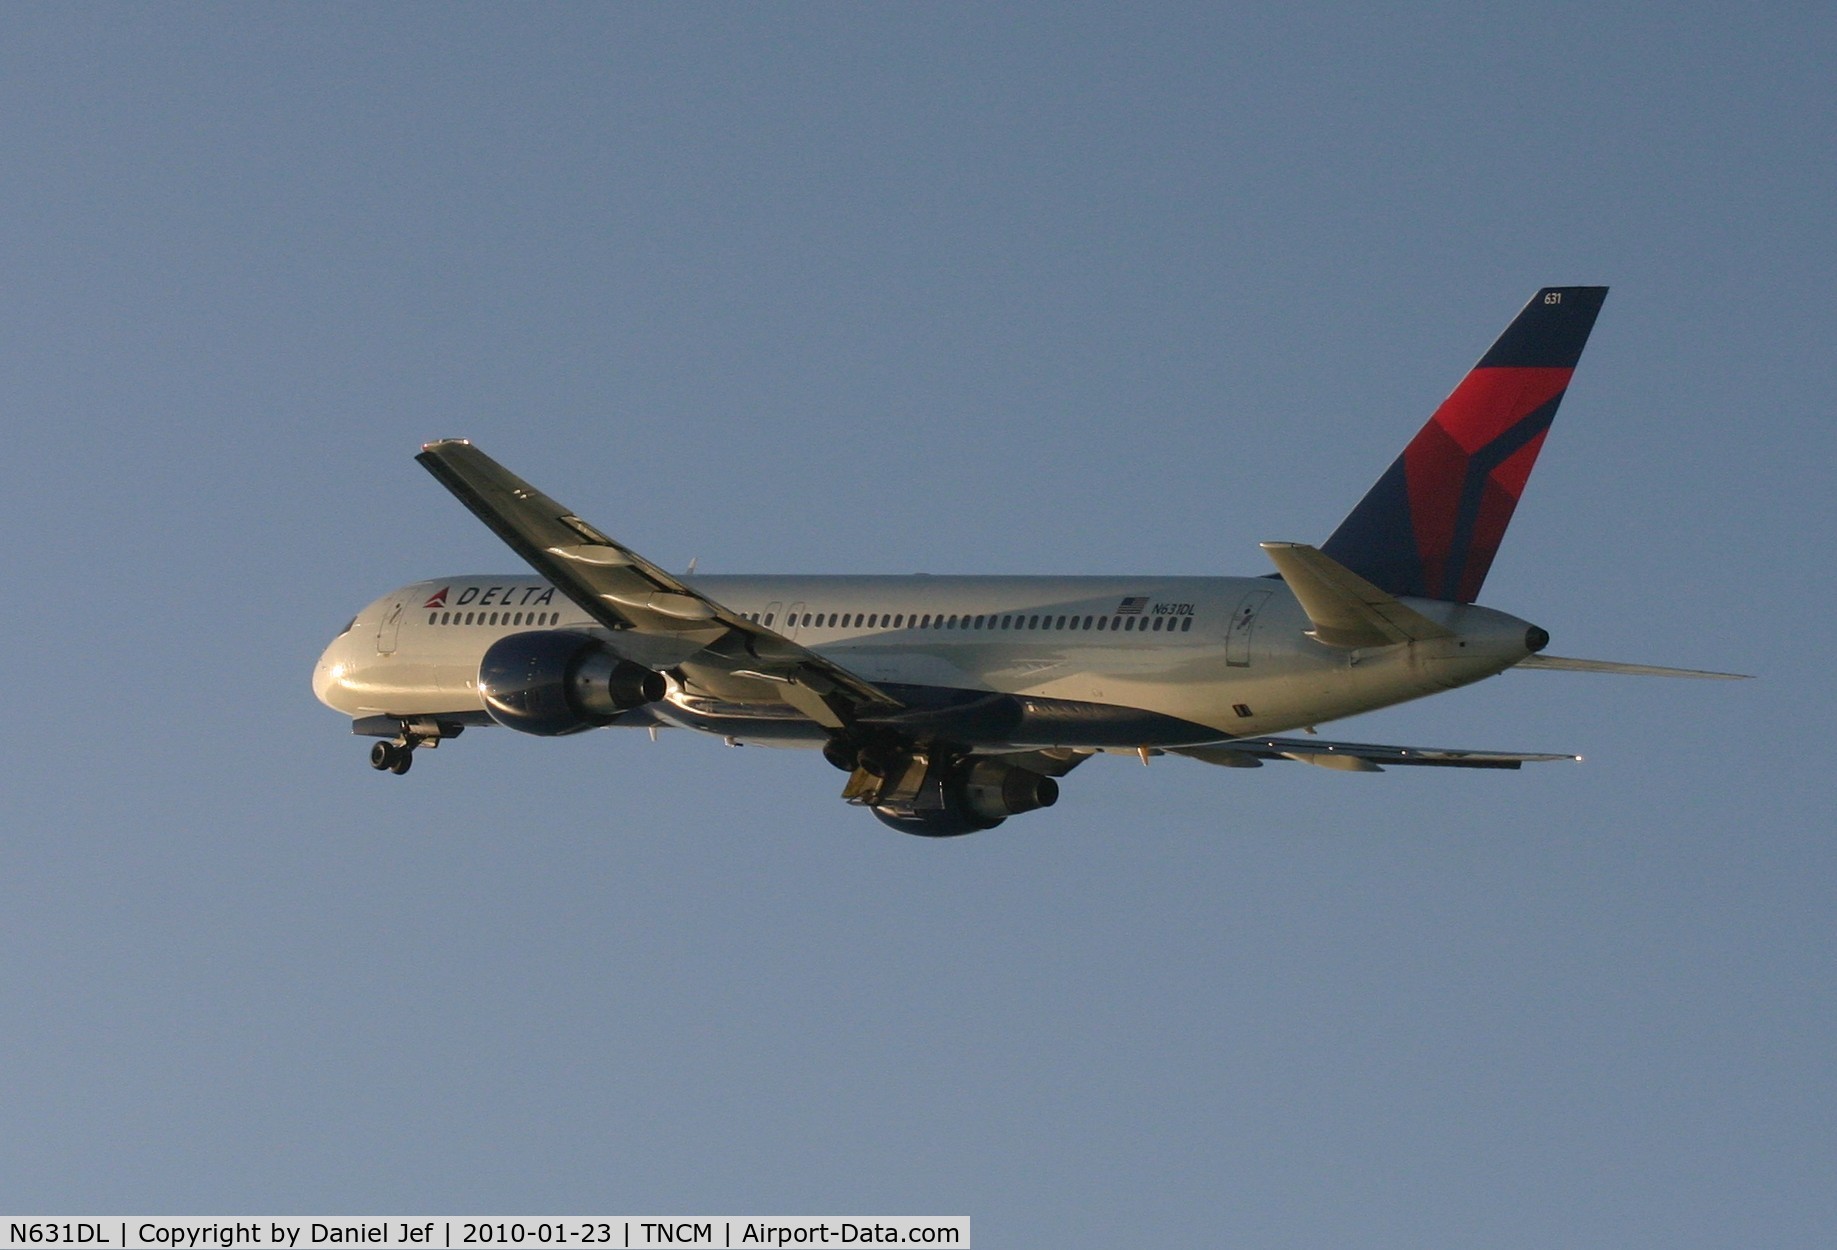 N631DL, 1987 Boeing 757-232 C/N 23612, Delta N631DL into the sunset at TNCM